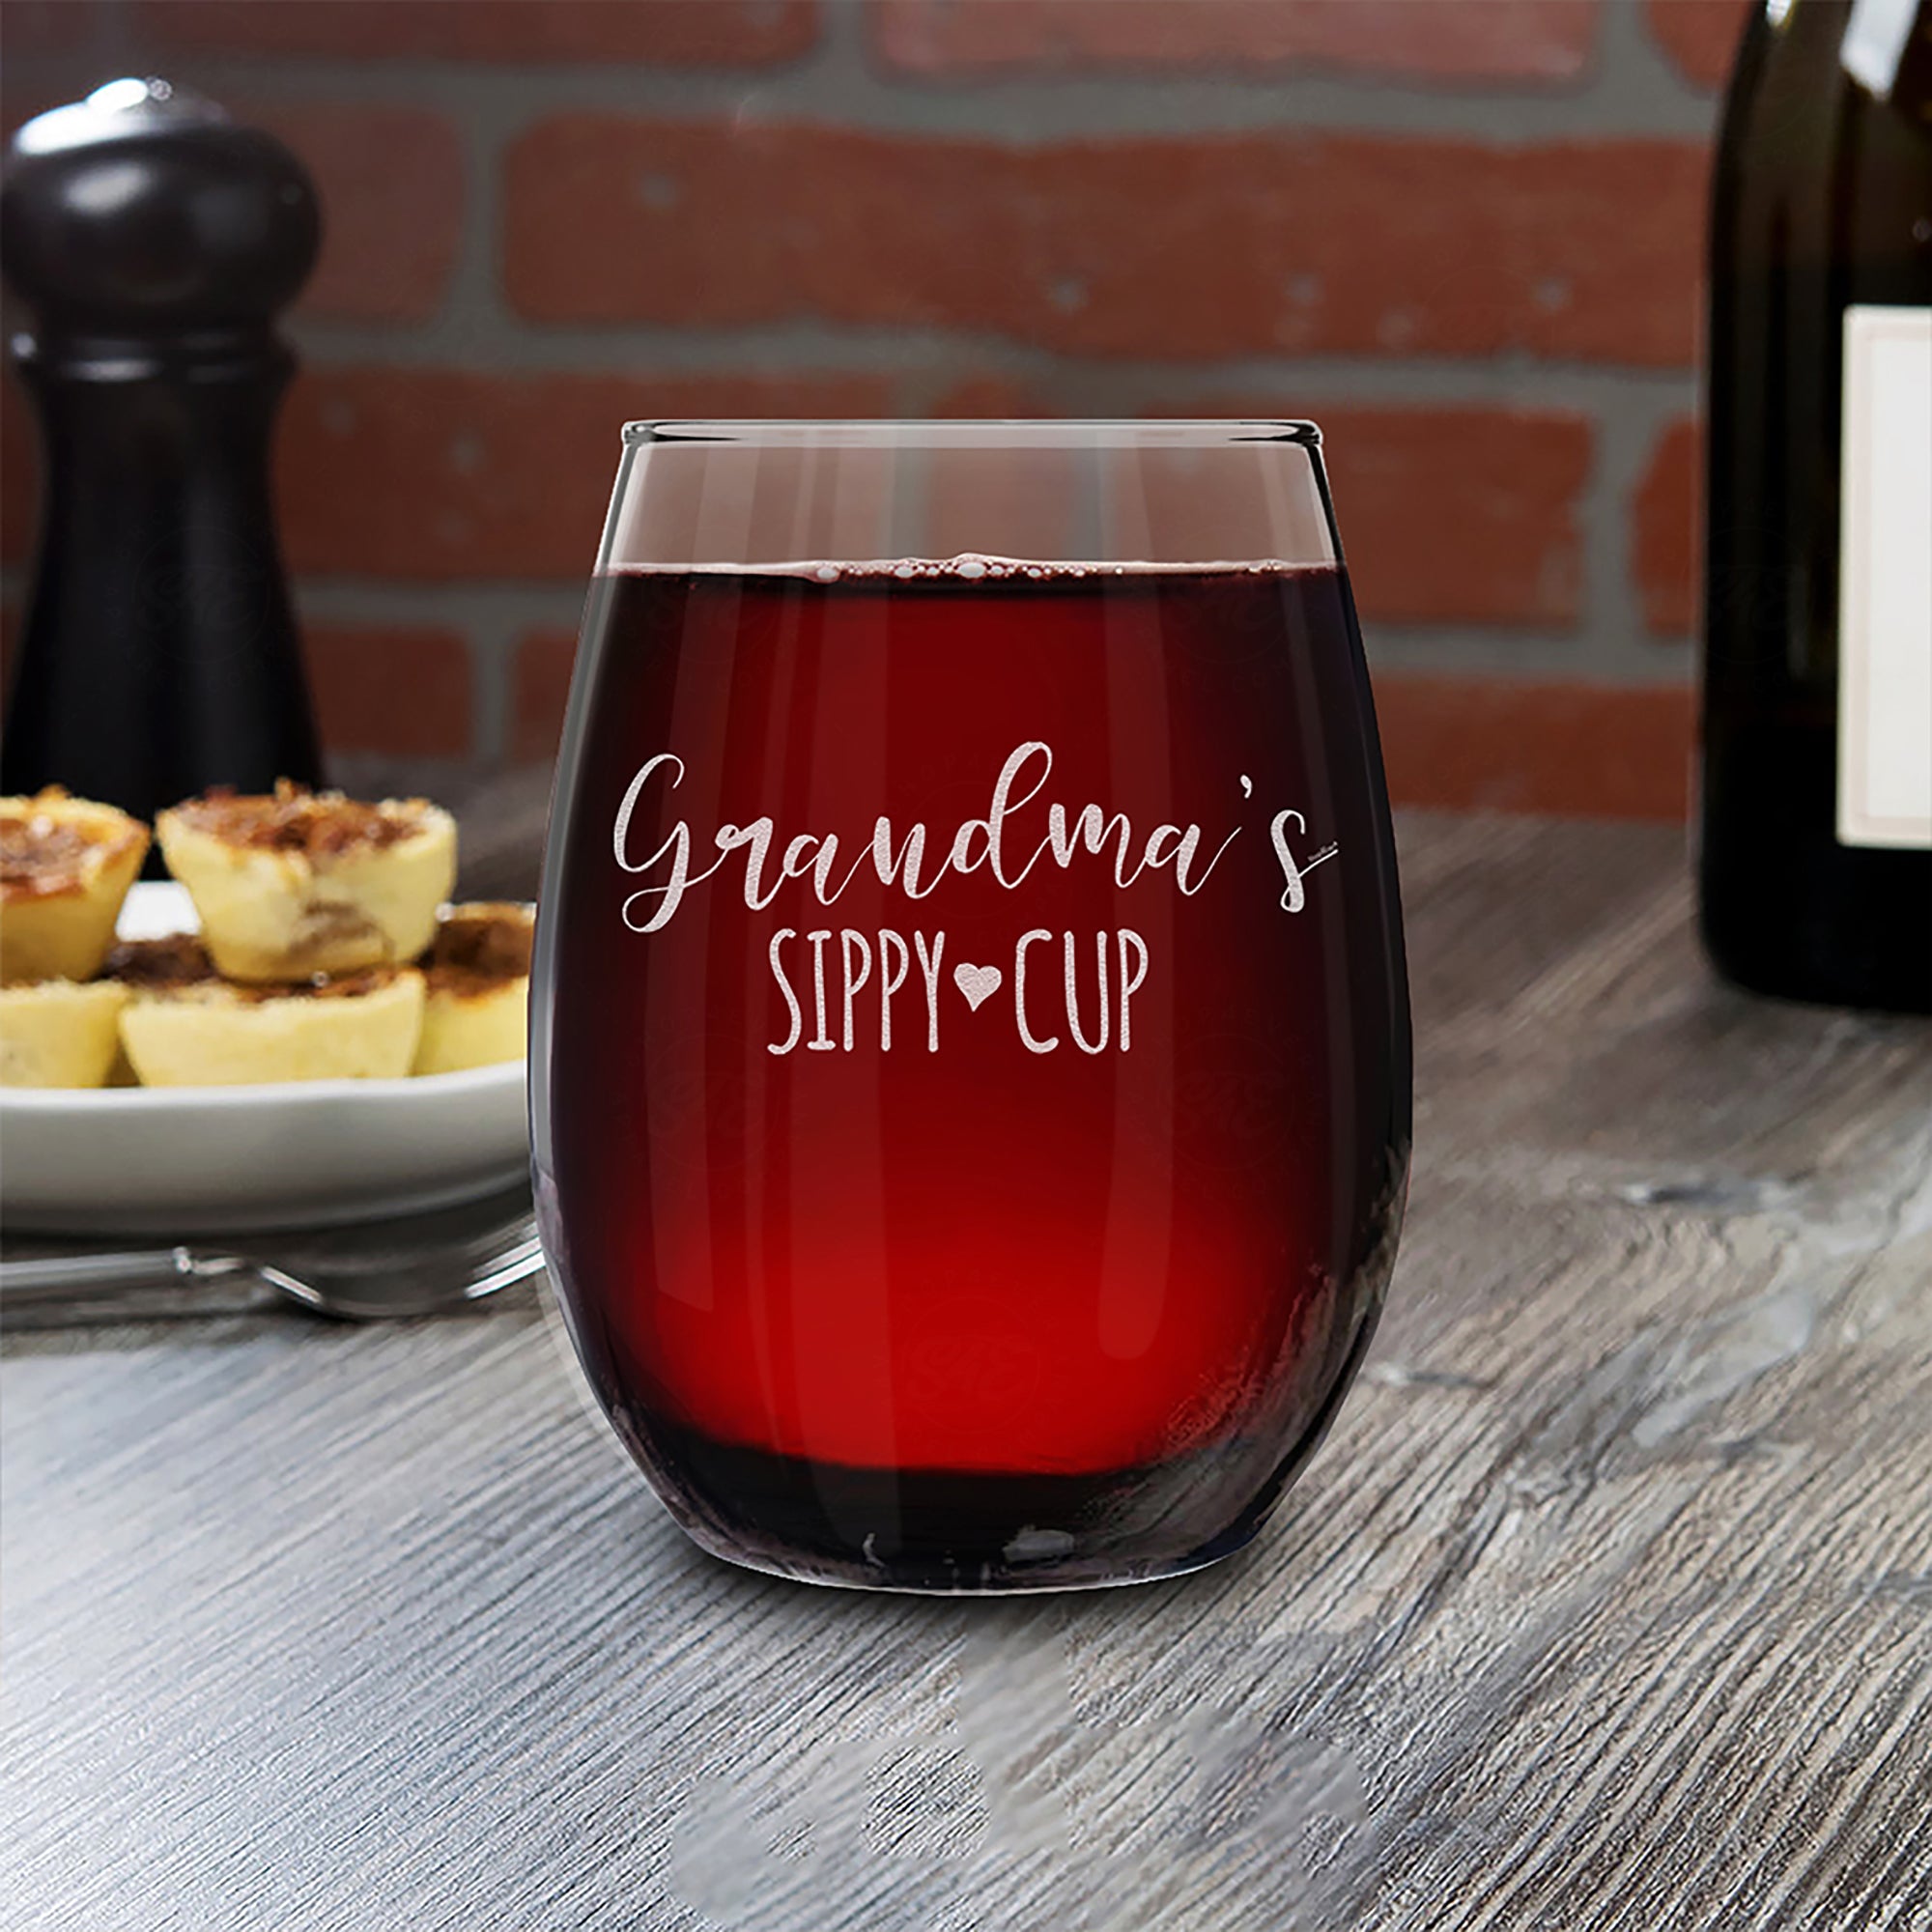 Grandma's Sippy Cup Engraved Stemless Wine Glass Mother's Day Gift for Grandma Pregnancy Announcement for New Grandma To Be